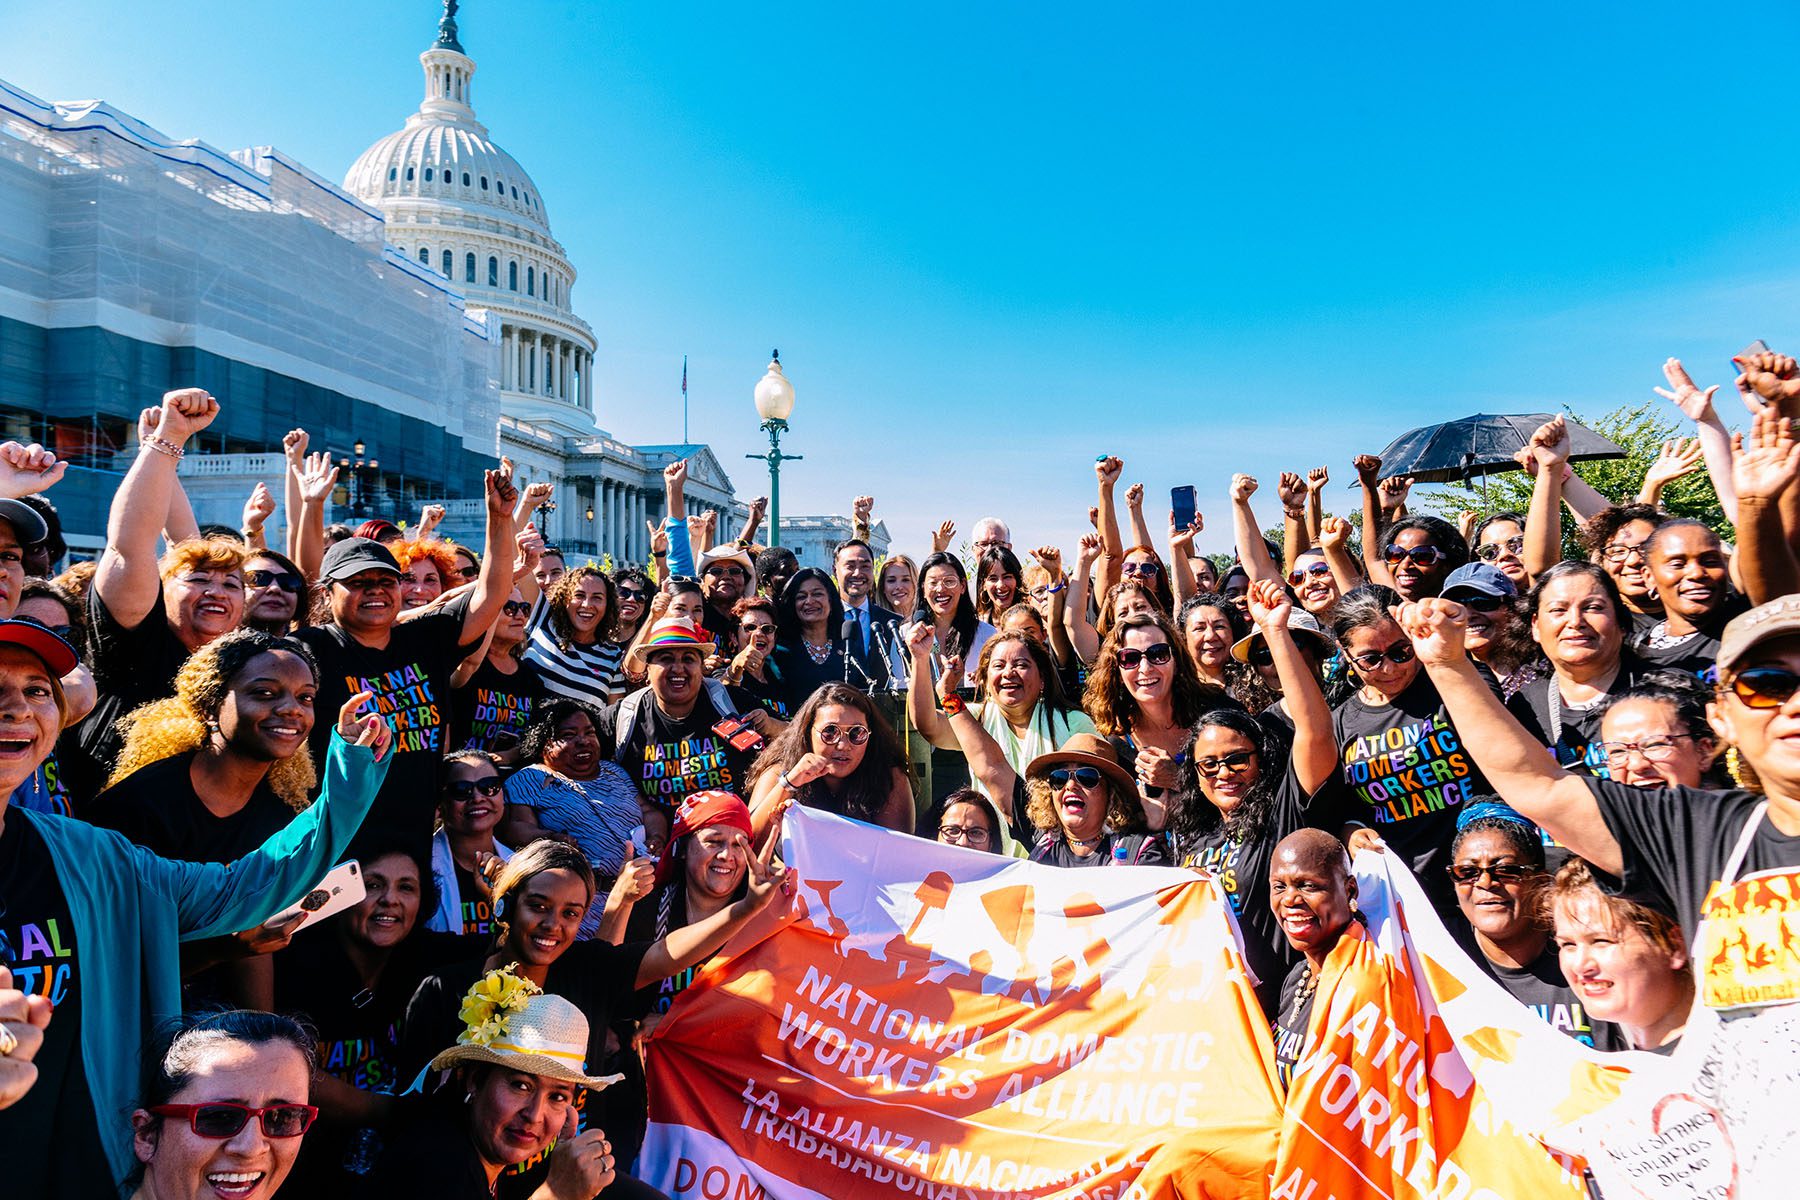 A large group of people hold their fists up in the air and smile in front of the Congress building. They are wearing t-shirts that read "National Domestic Workers Alliance."